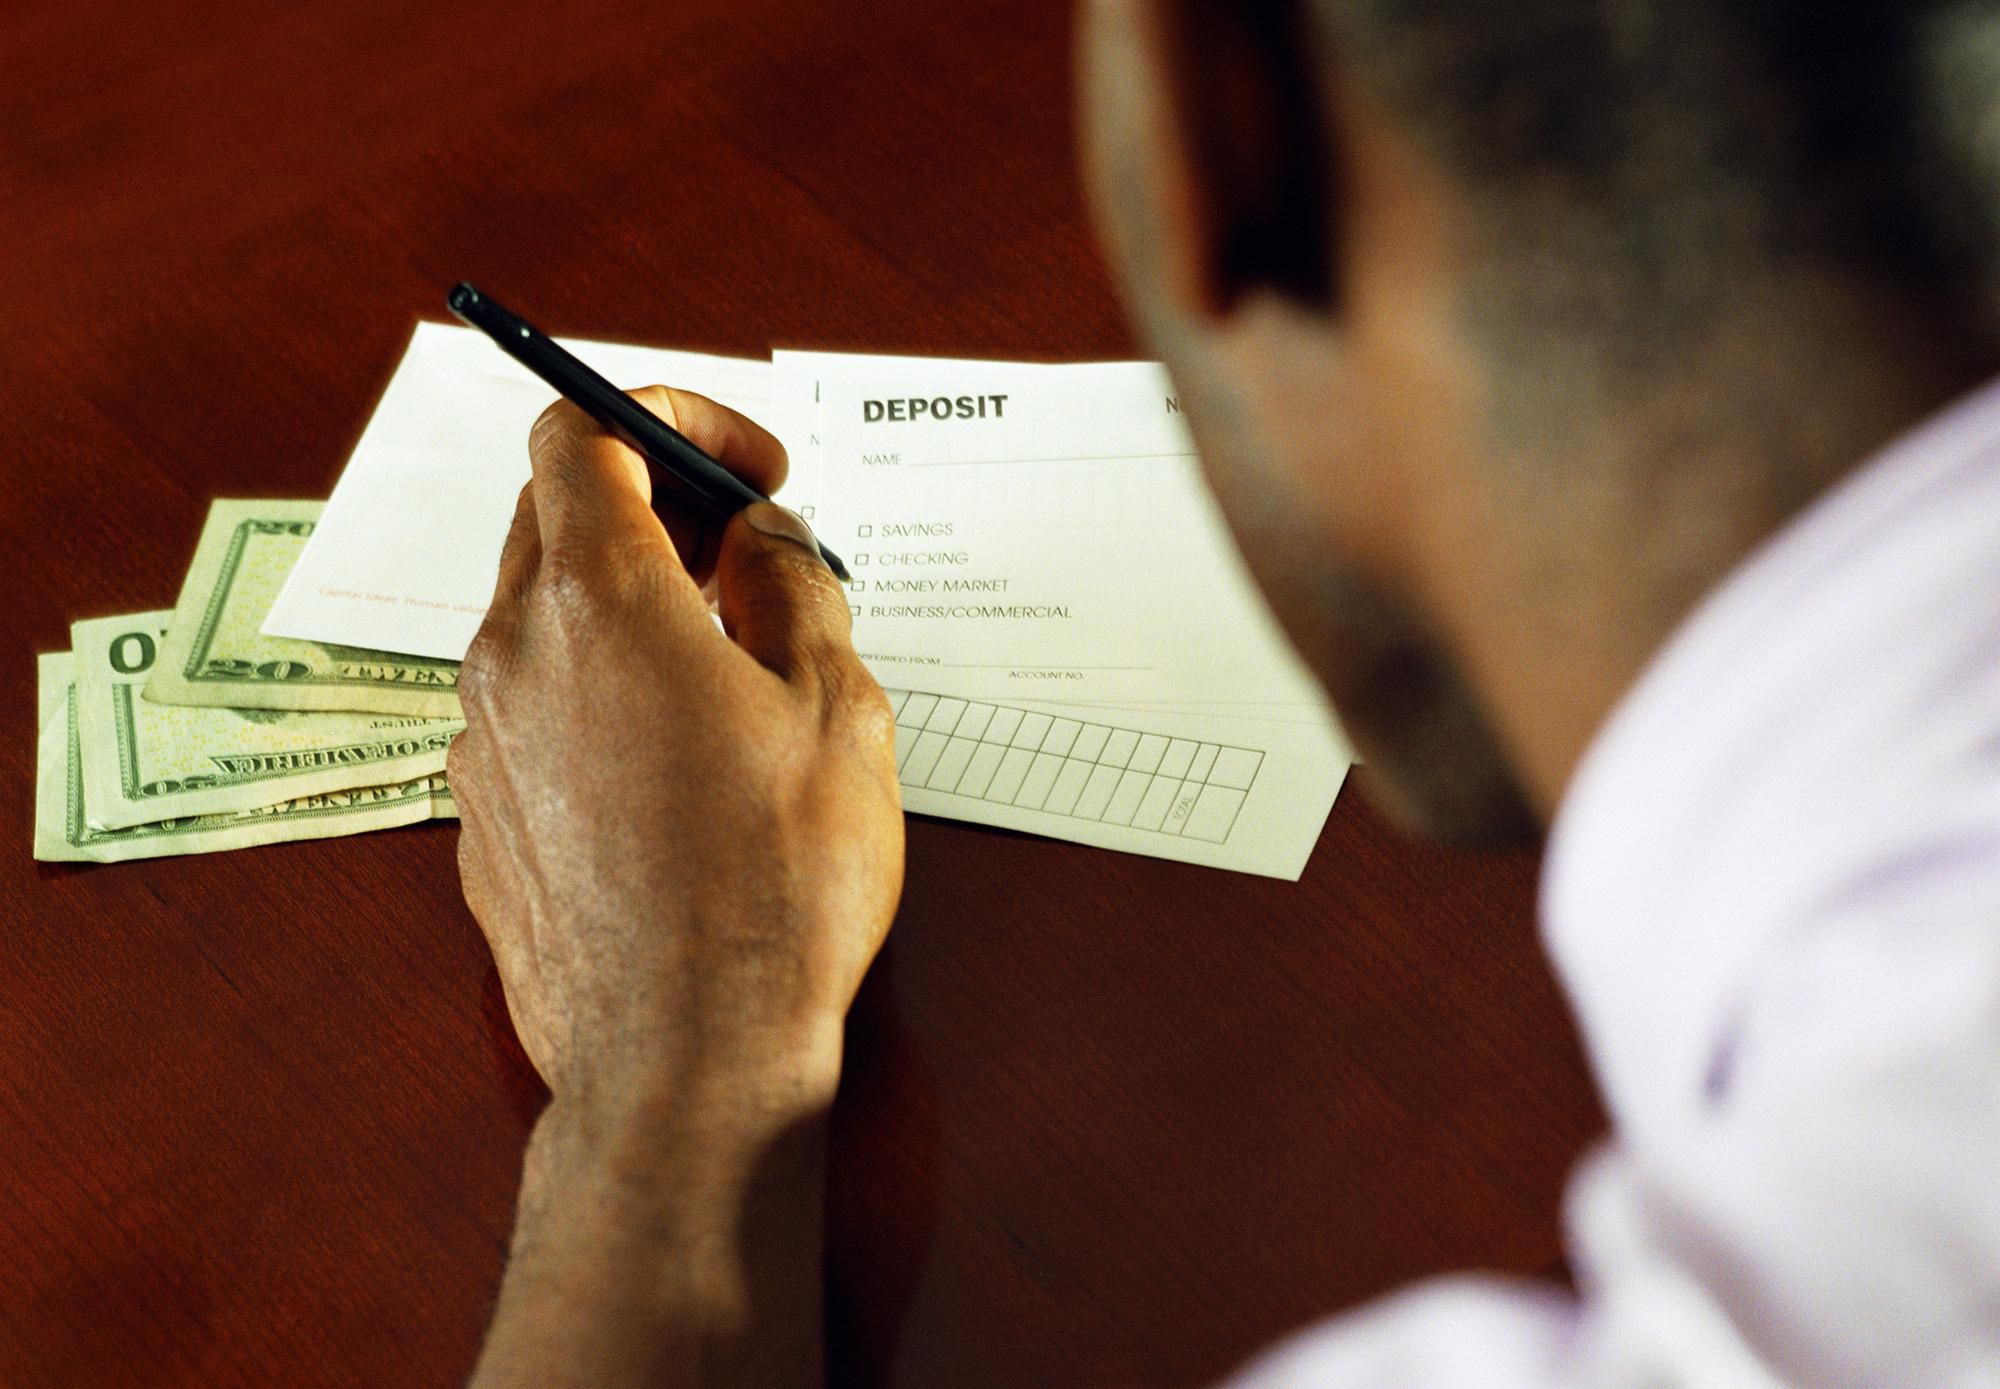 How to Fill Out a Deposit Slip